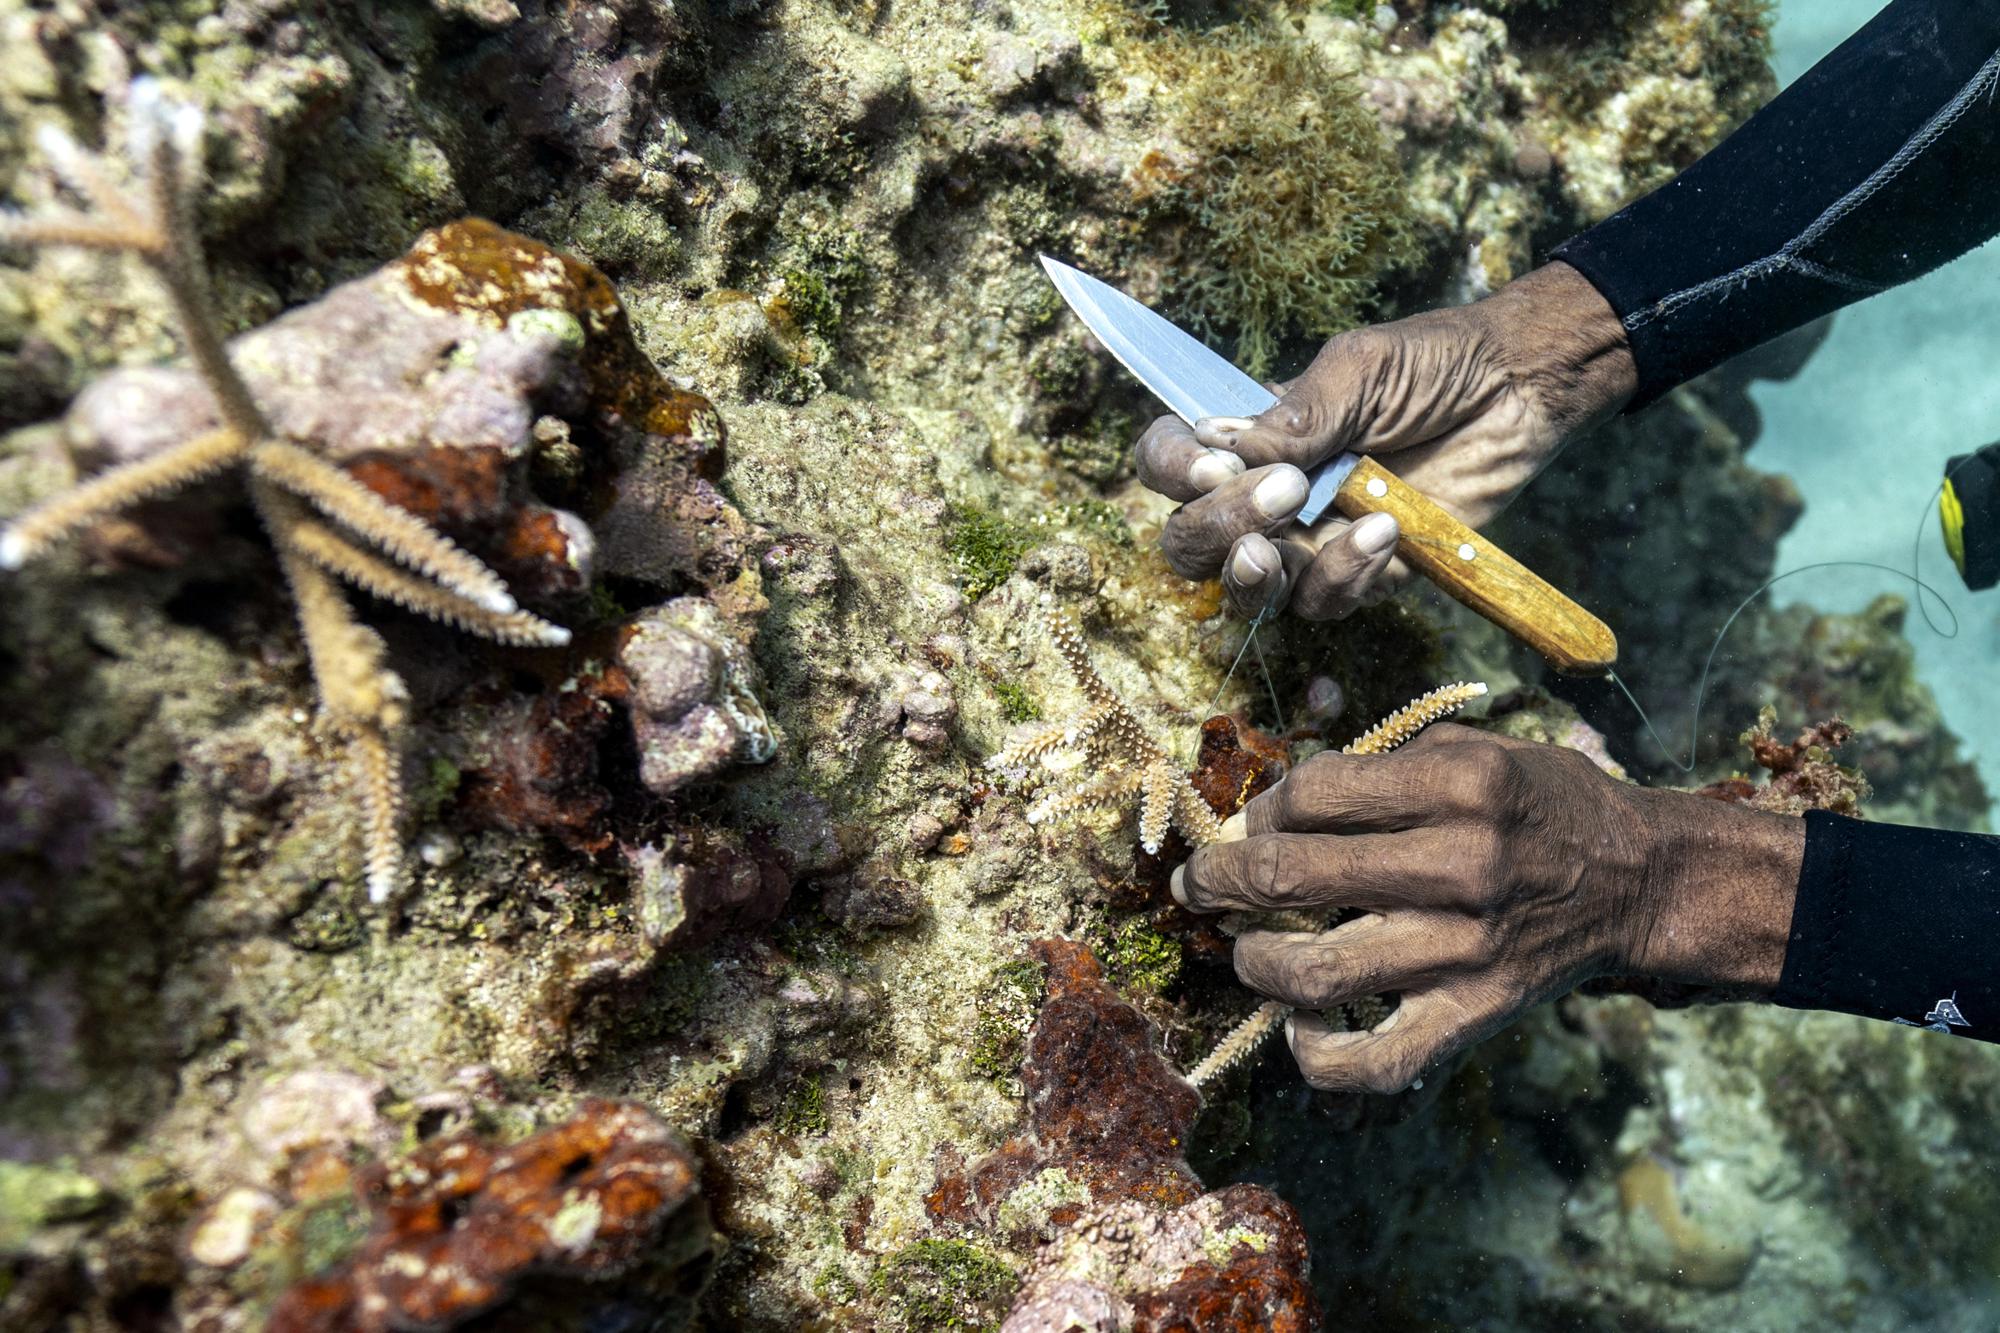 FILE - Diver Everton Simpson plants staghorn harvested from a coral nursery inside the the White River Fish Sanctuary Tuesday, Feb. 12, 2019, in Ocho Rios, Jamaica. Simpson uses bits of fishing line to tie clusters of staghorn coral onto rocky outcroppings, a temporary binding until the coral's limestone skeleton grows and fixes itself onto the rock. The goal is to jumpstart the natural growth of a coral reef. (AP Photo/David J. Phillip, File)